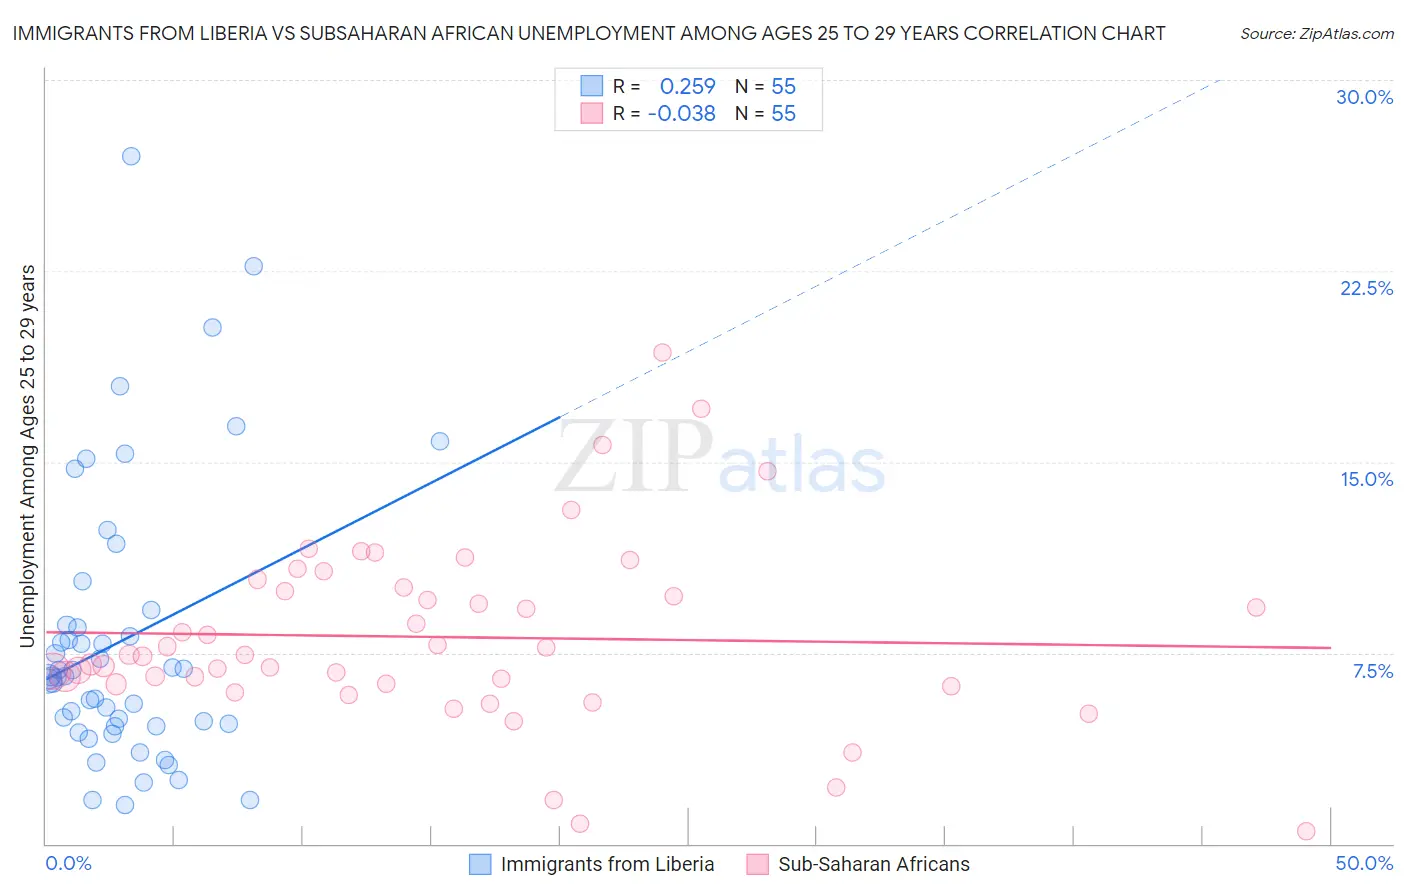 Immigrants from Liberia vs Subsaharan African Unemployment Among Ages 25 to 29 years